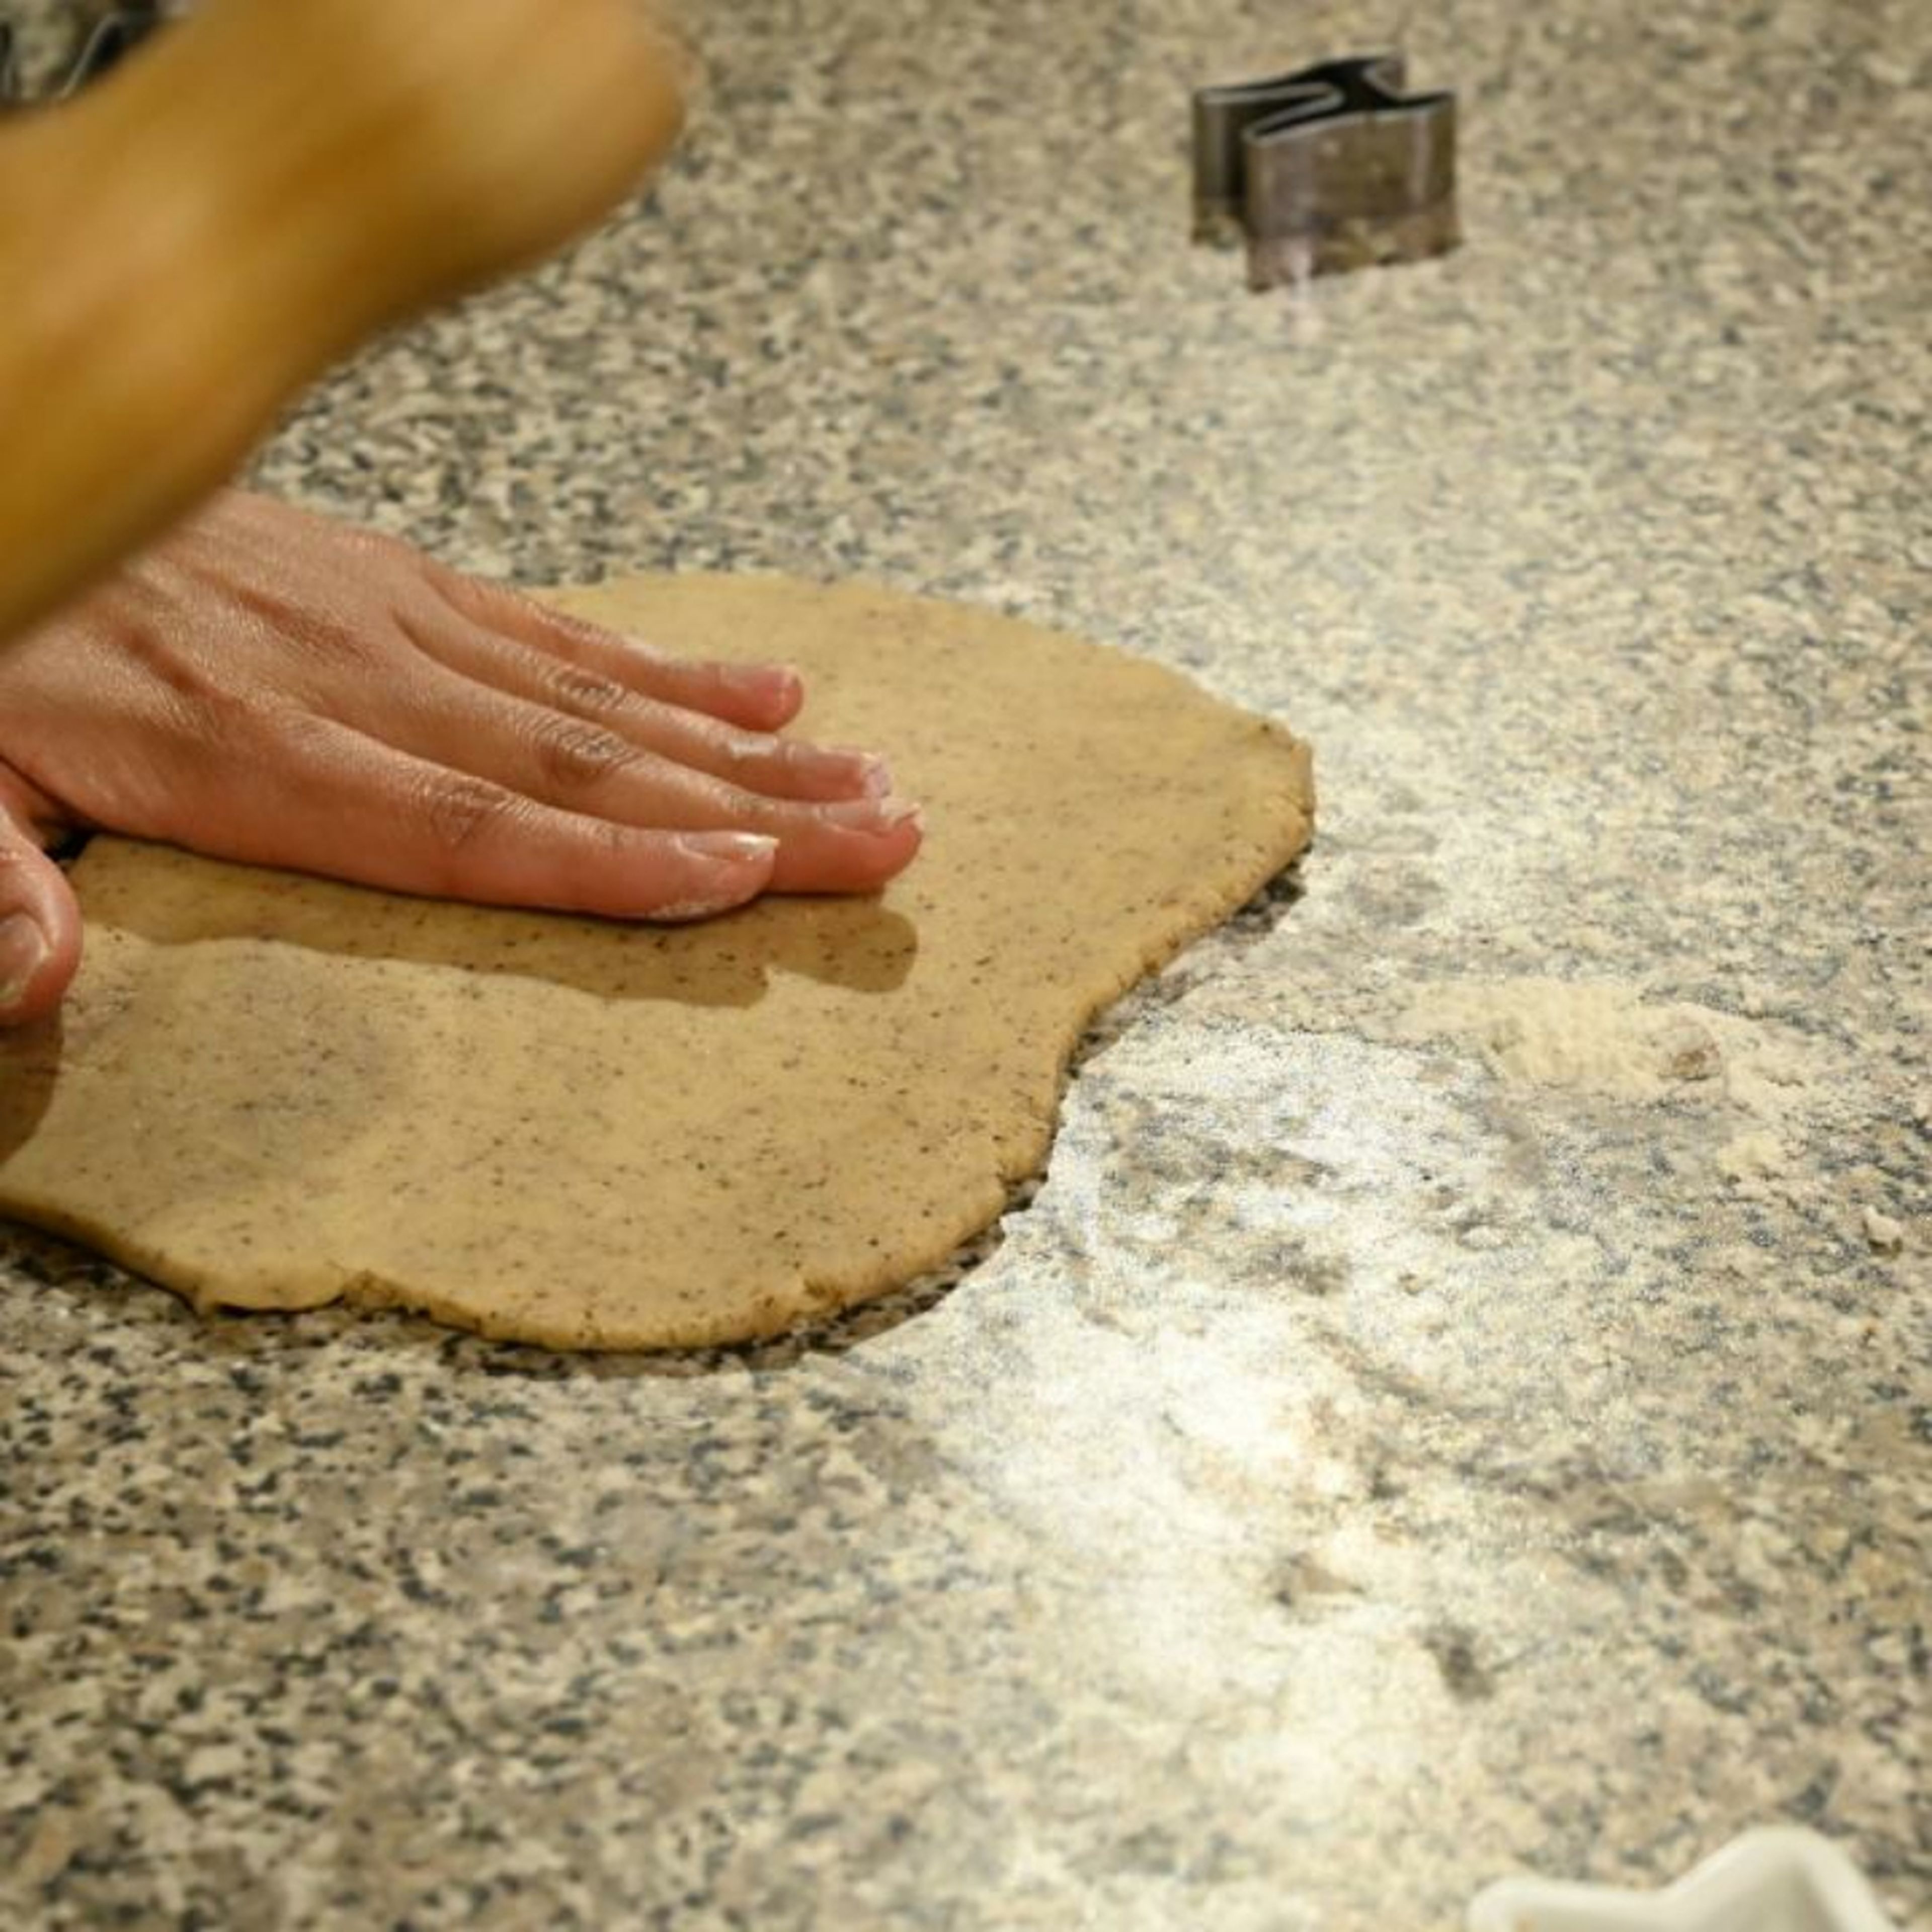 Turn the dough on to a floured surface and gently roll to a thickness of 1cm.